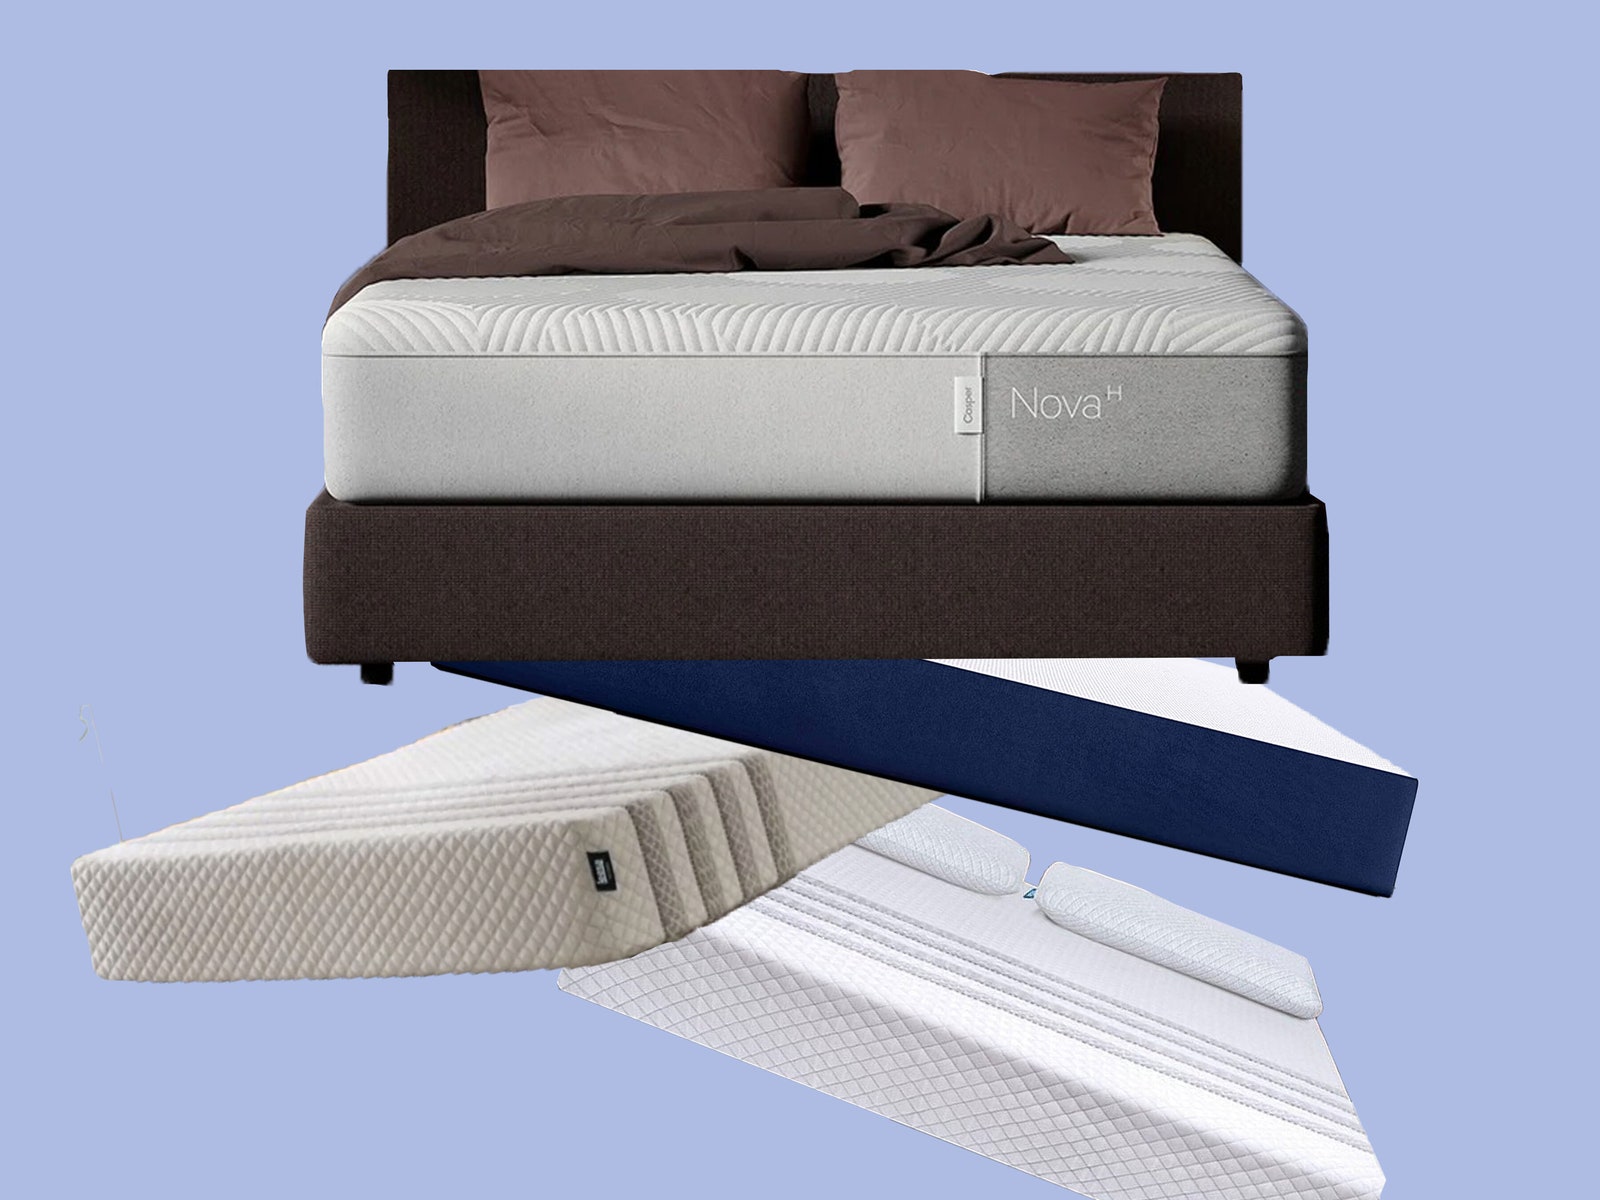 21 Best Prime Day Mattress Deals 2023 Up to 50% Off: Find Deals from Casper, Nectar, Tuft & Needle, and More